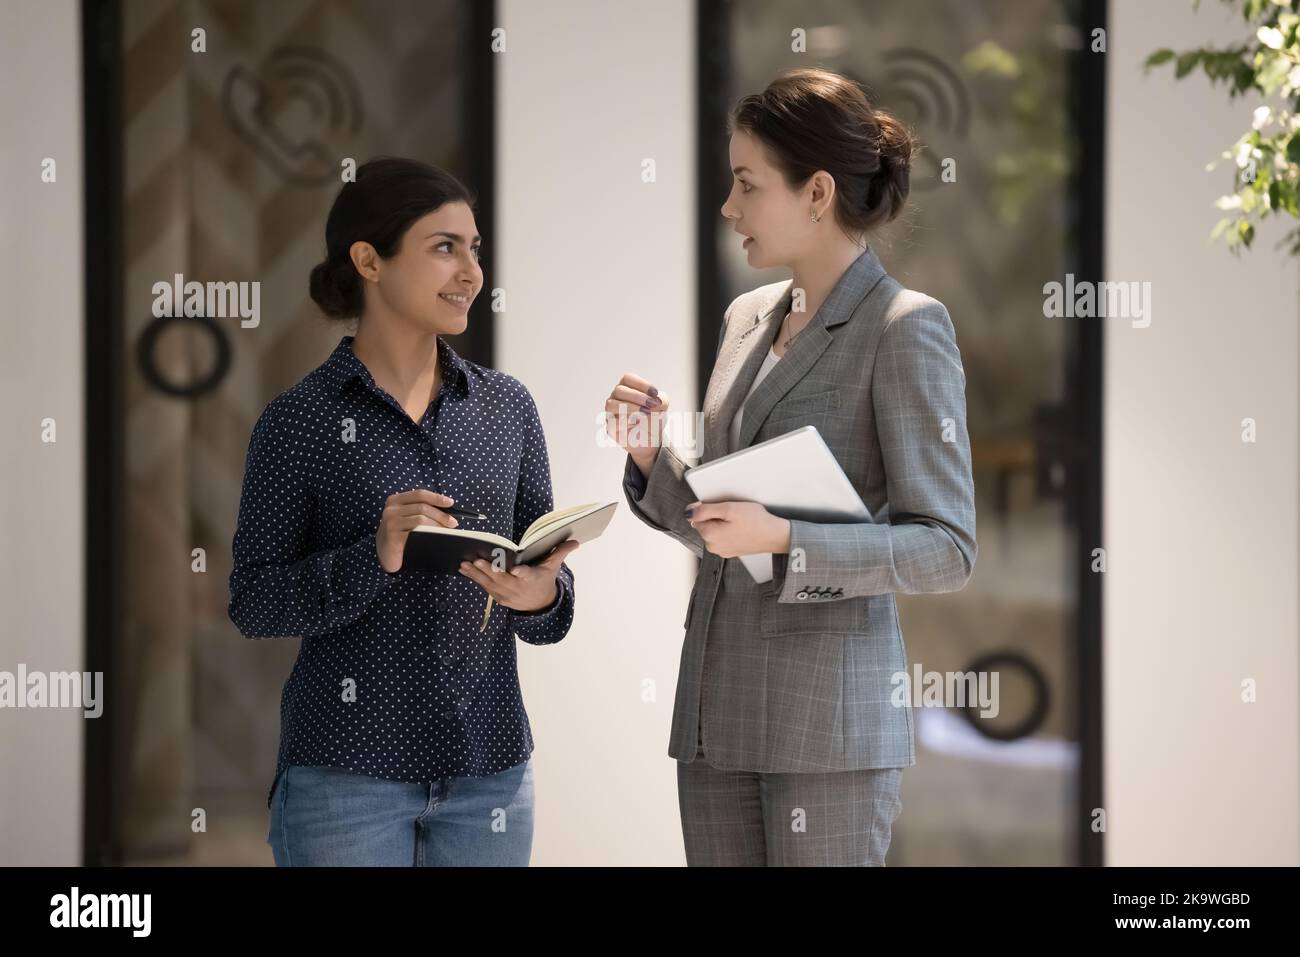 Two multi ethnic businesswomen standing in office hallway and talking Stock Photo